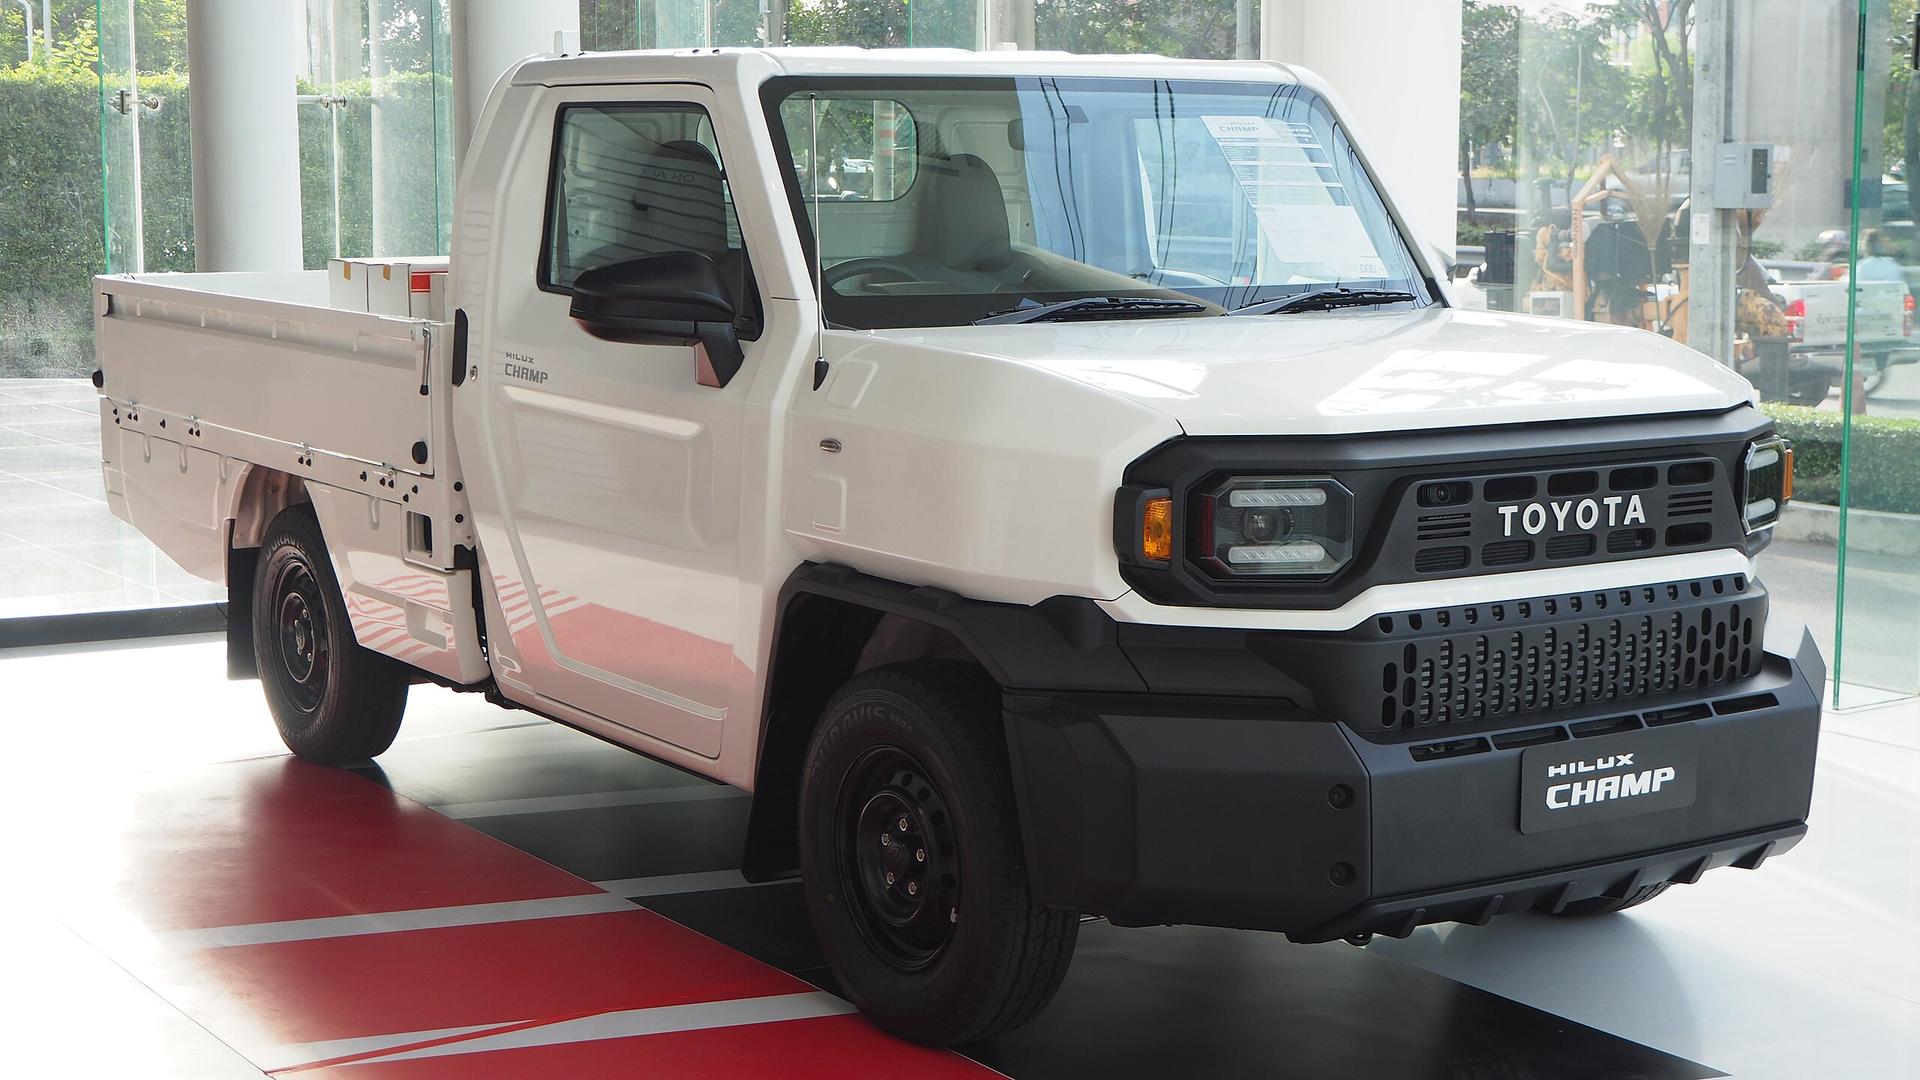 Toyota Hilux Champ 2.4 Diesel AT LWB (110kW / 150 PS) 2023 (Thailand)